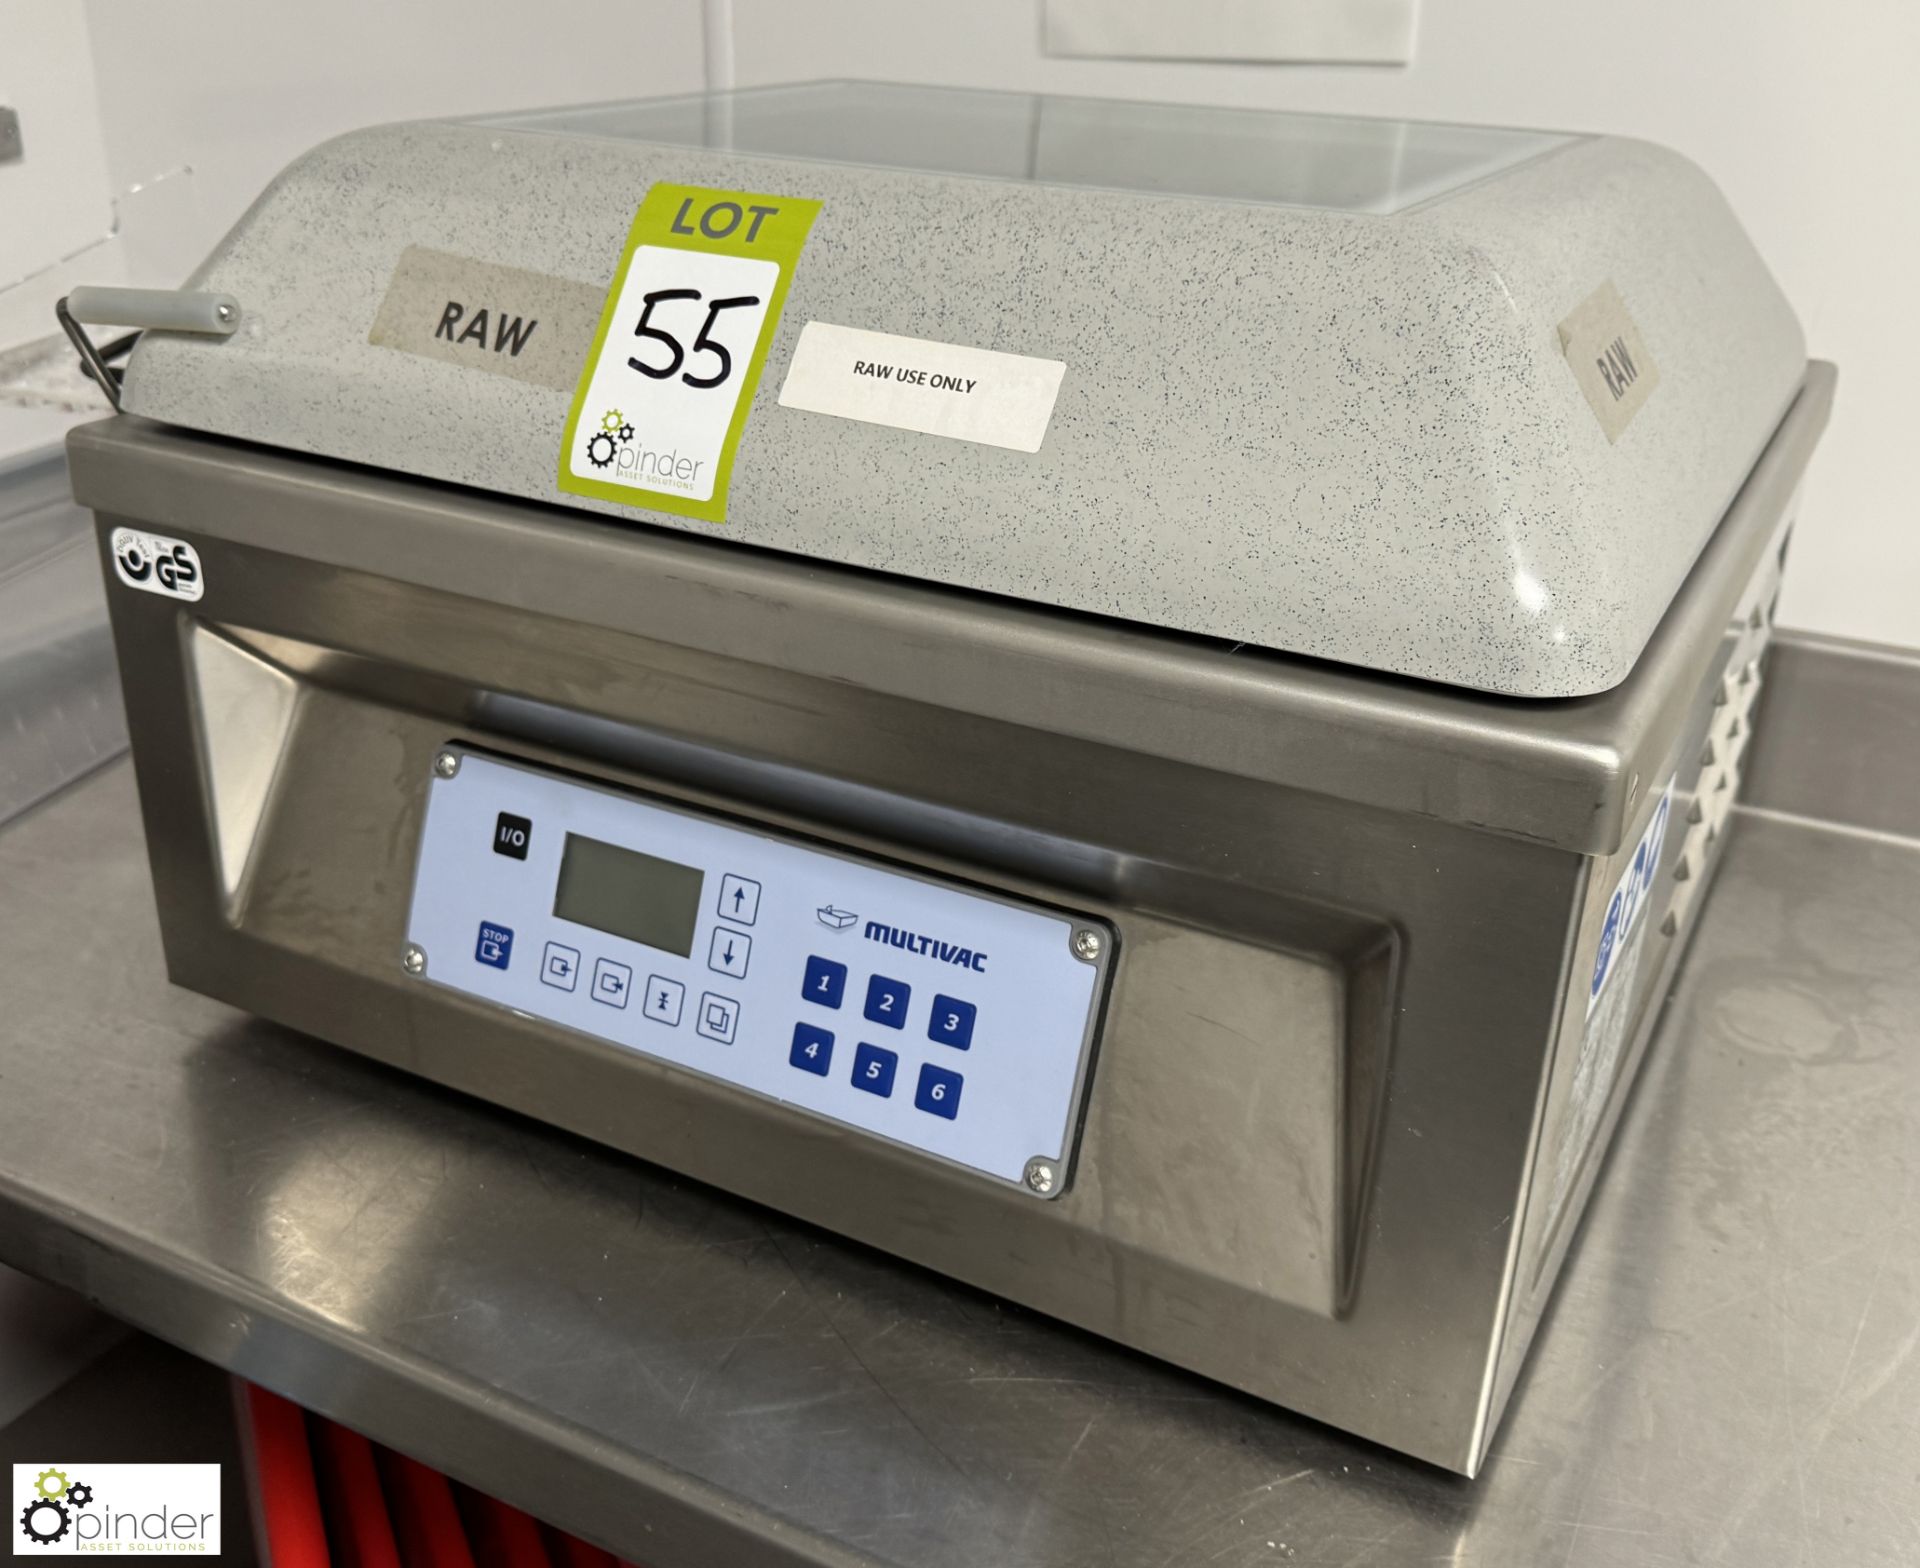 Multivac C200 counter top Vacuum Packer, 240volts, year 2015 (location in building – basement - Image 5 of 6